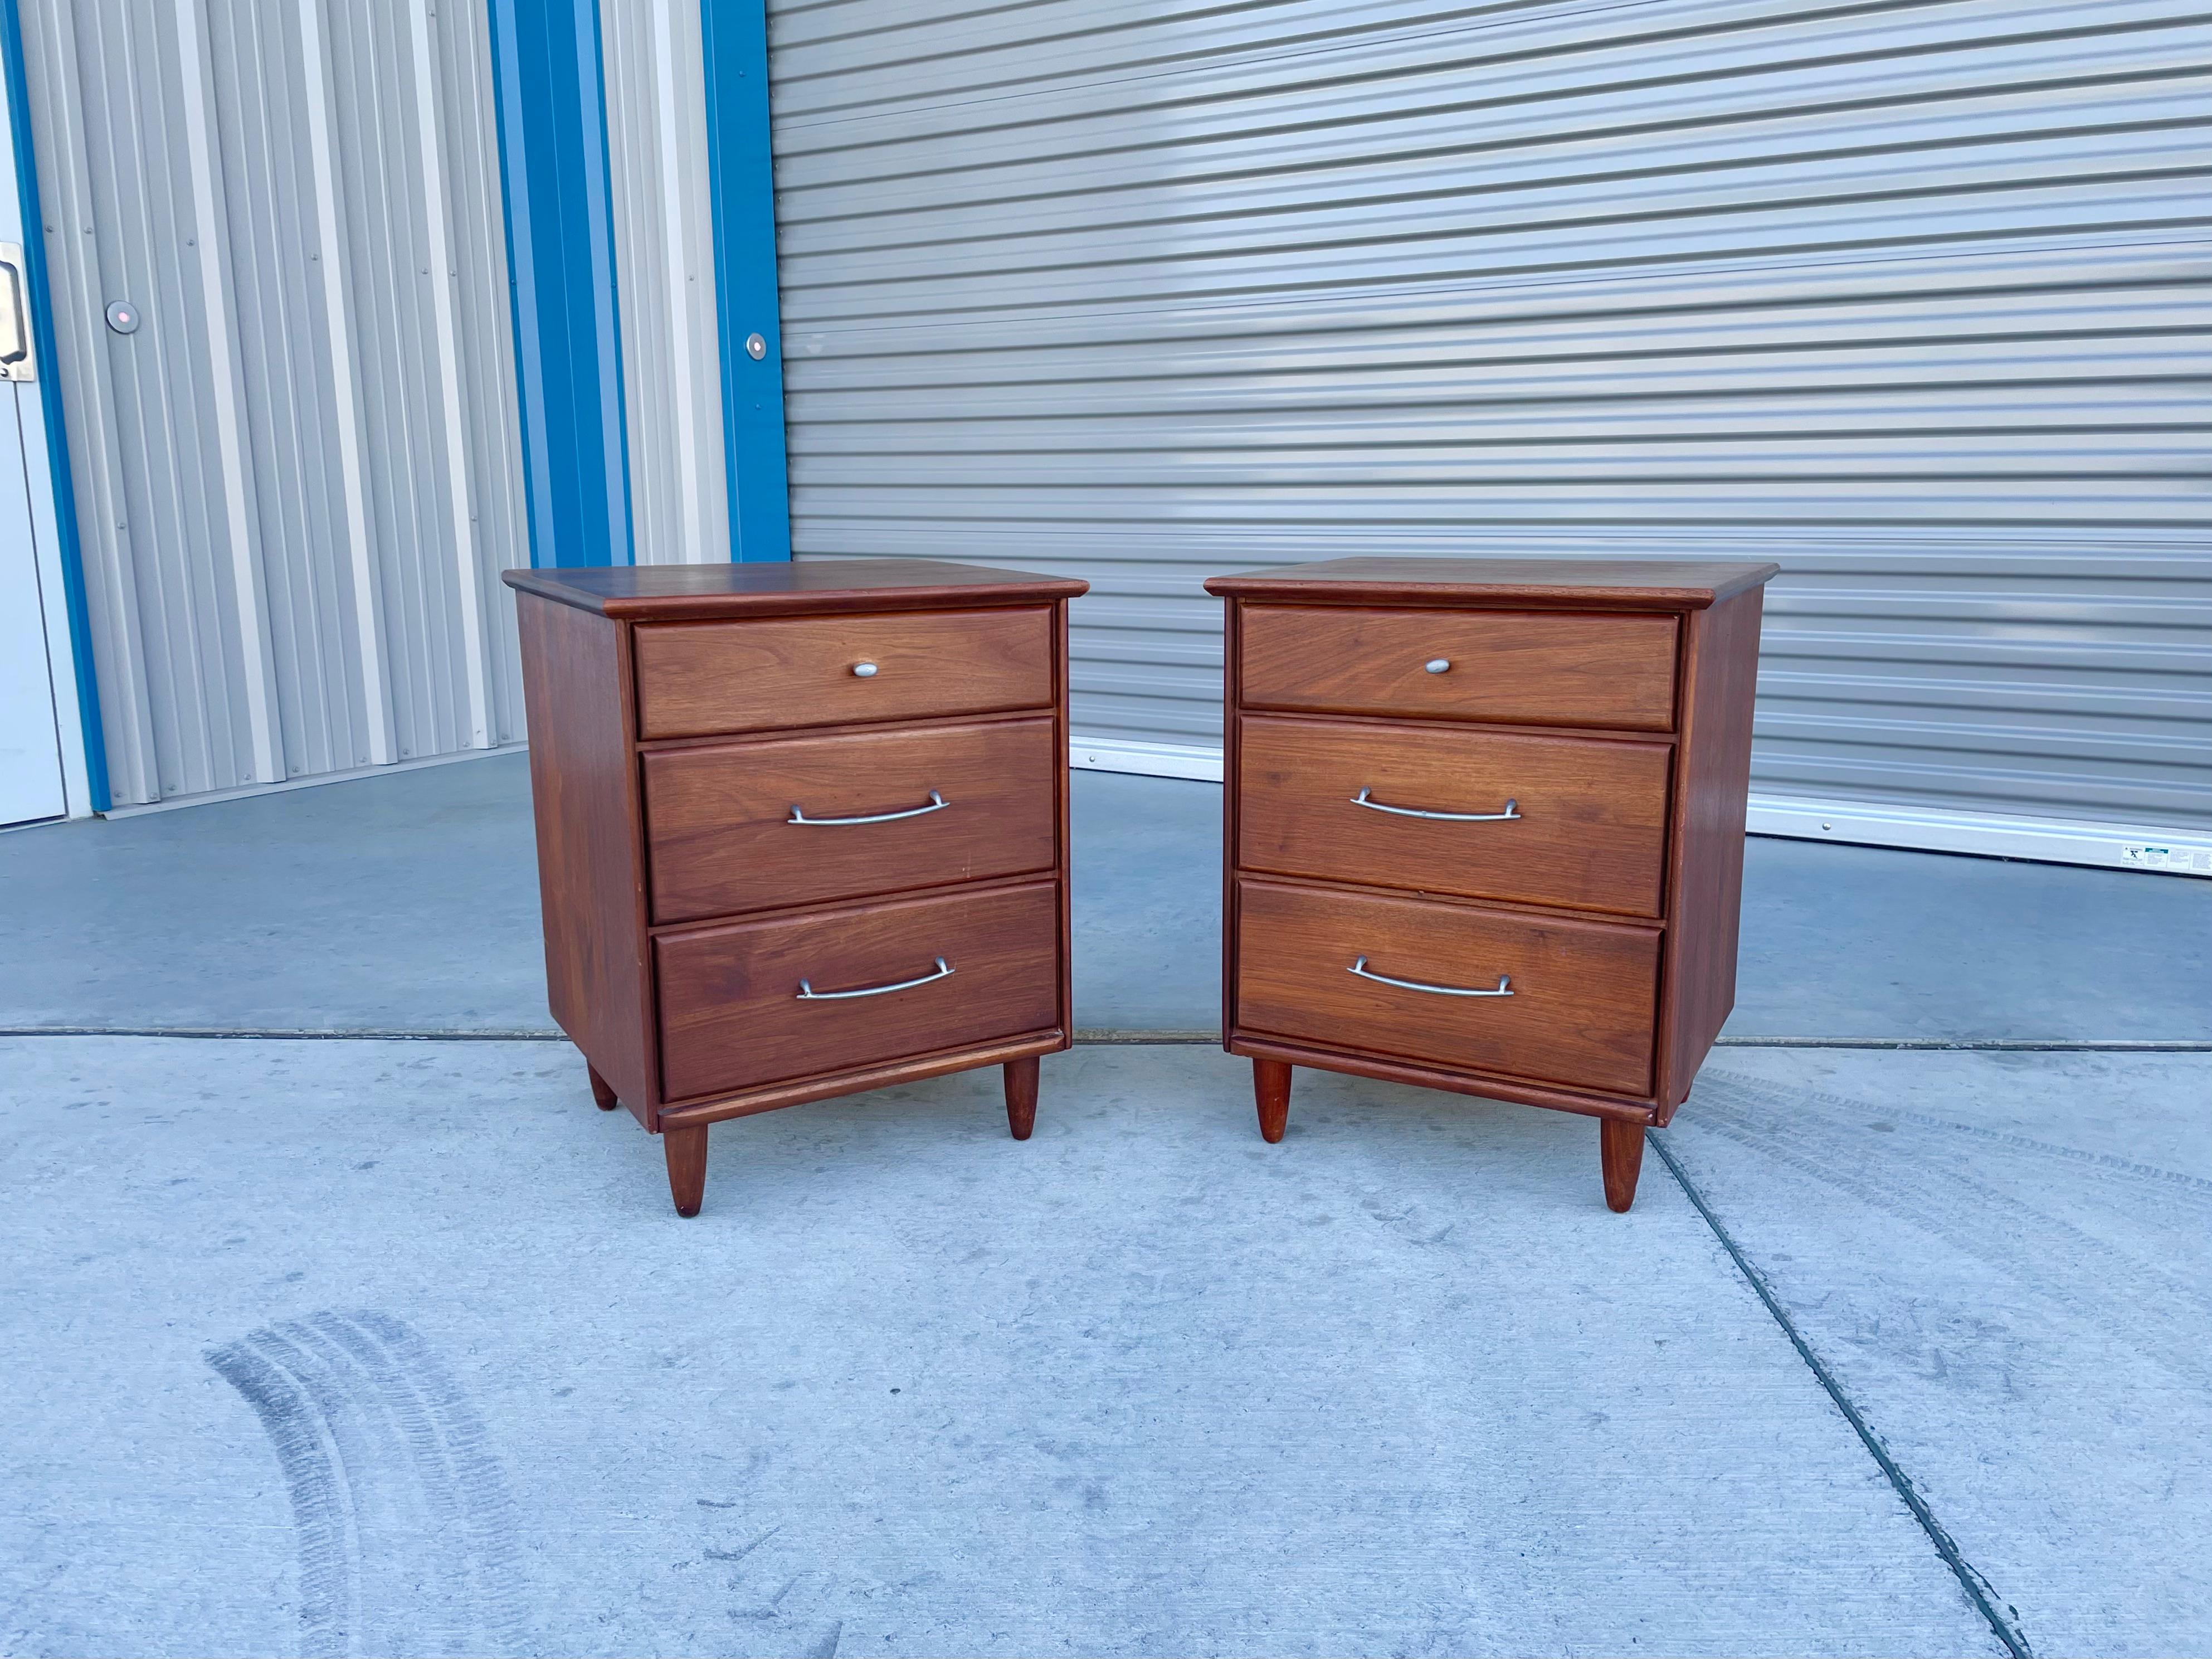 These Mid-century walnut nightstands designed and manufactured by Ace-Hi in the United States circa 1960s. This stunning pair of nightstands features a walnut frame with three pull-out drawers on each nightstand, giving you plenty of storage space.